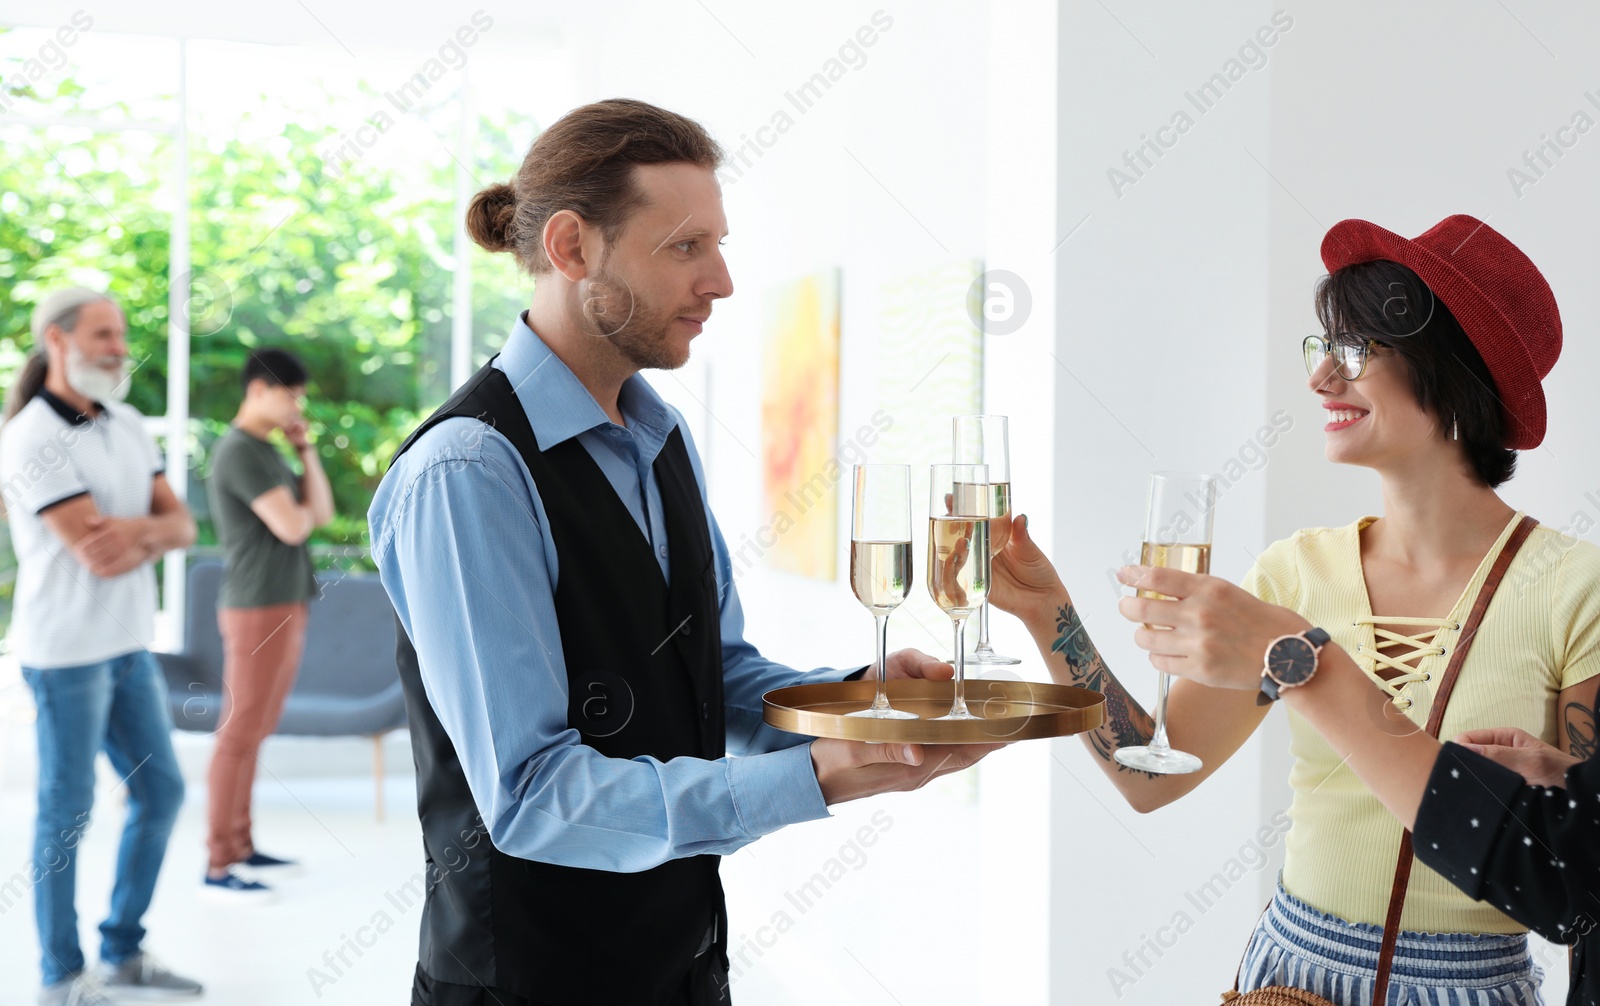 Photo of Waiter serving champagne to women at exhibition in art gallery